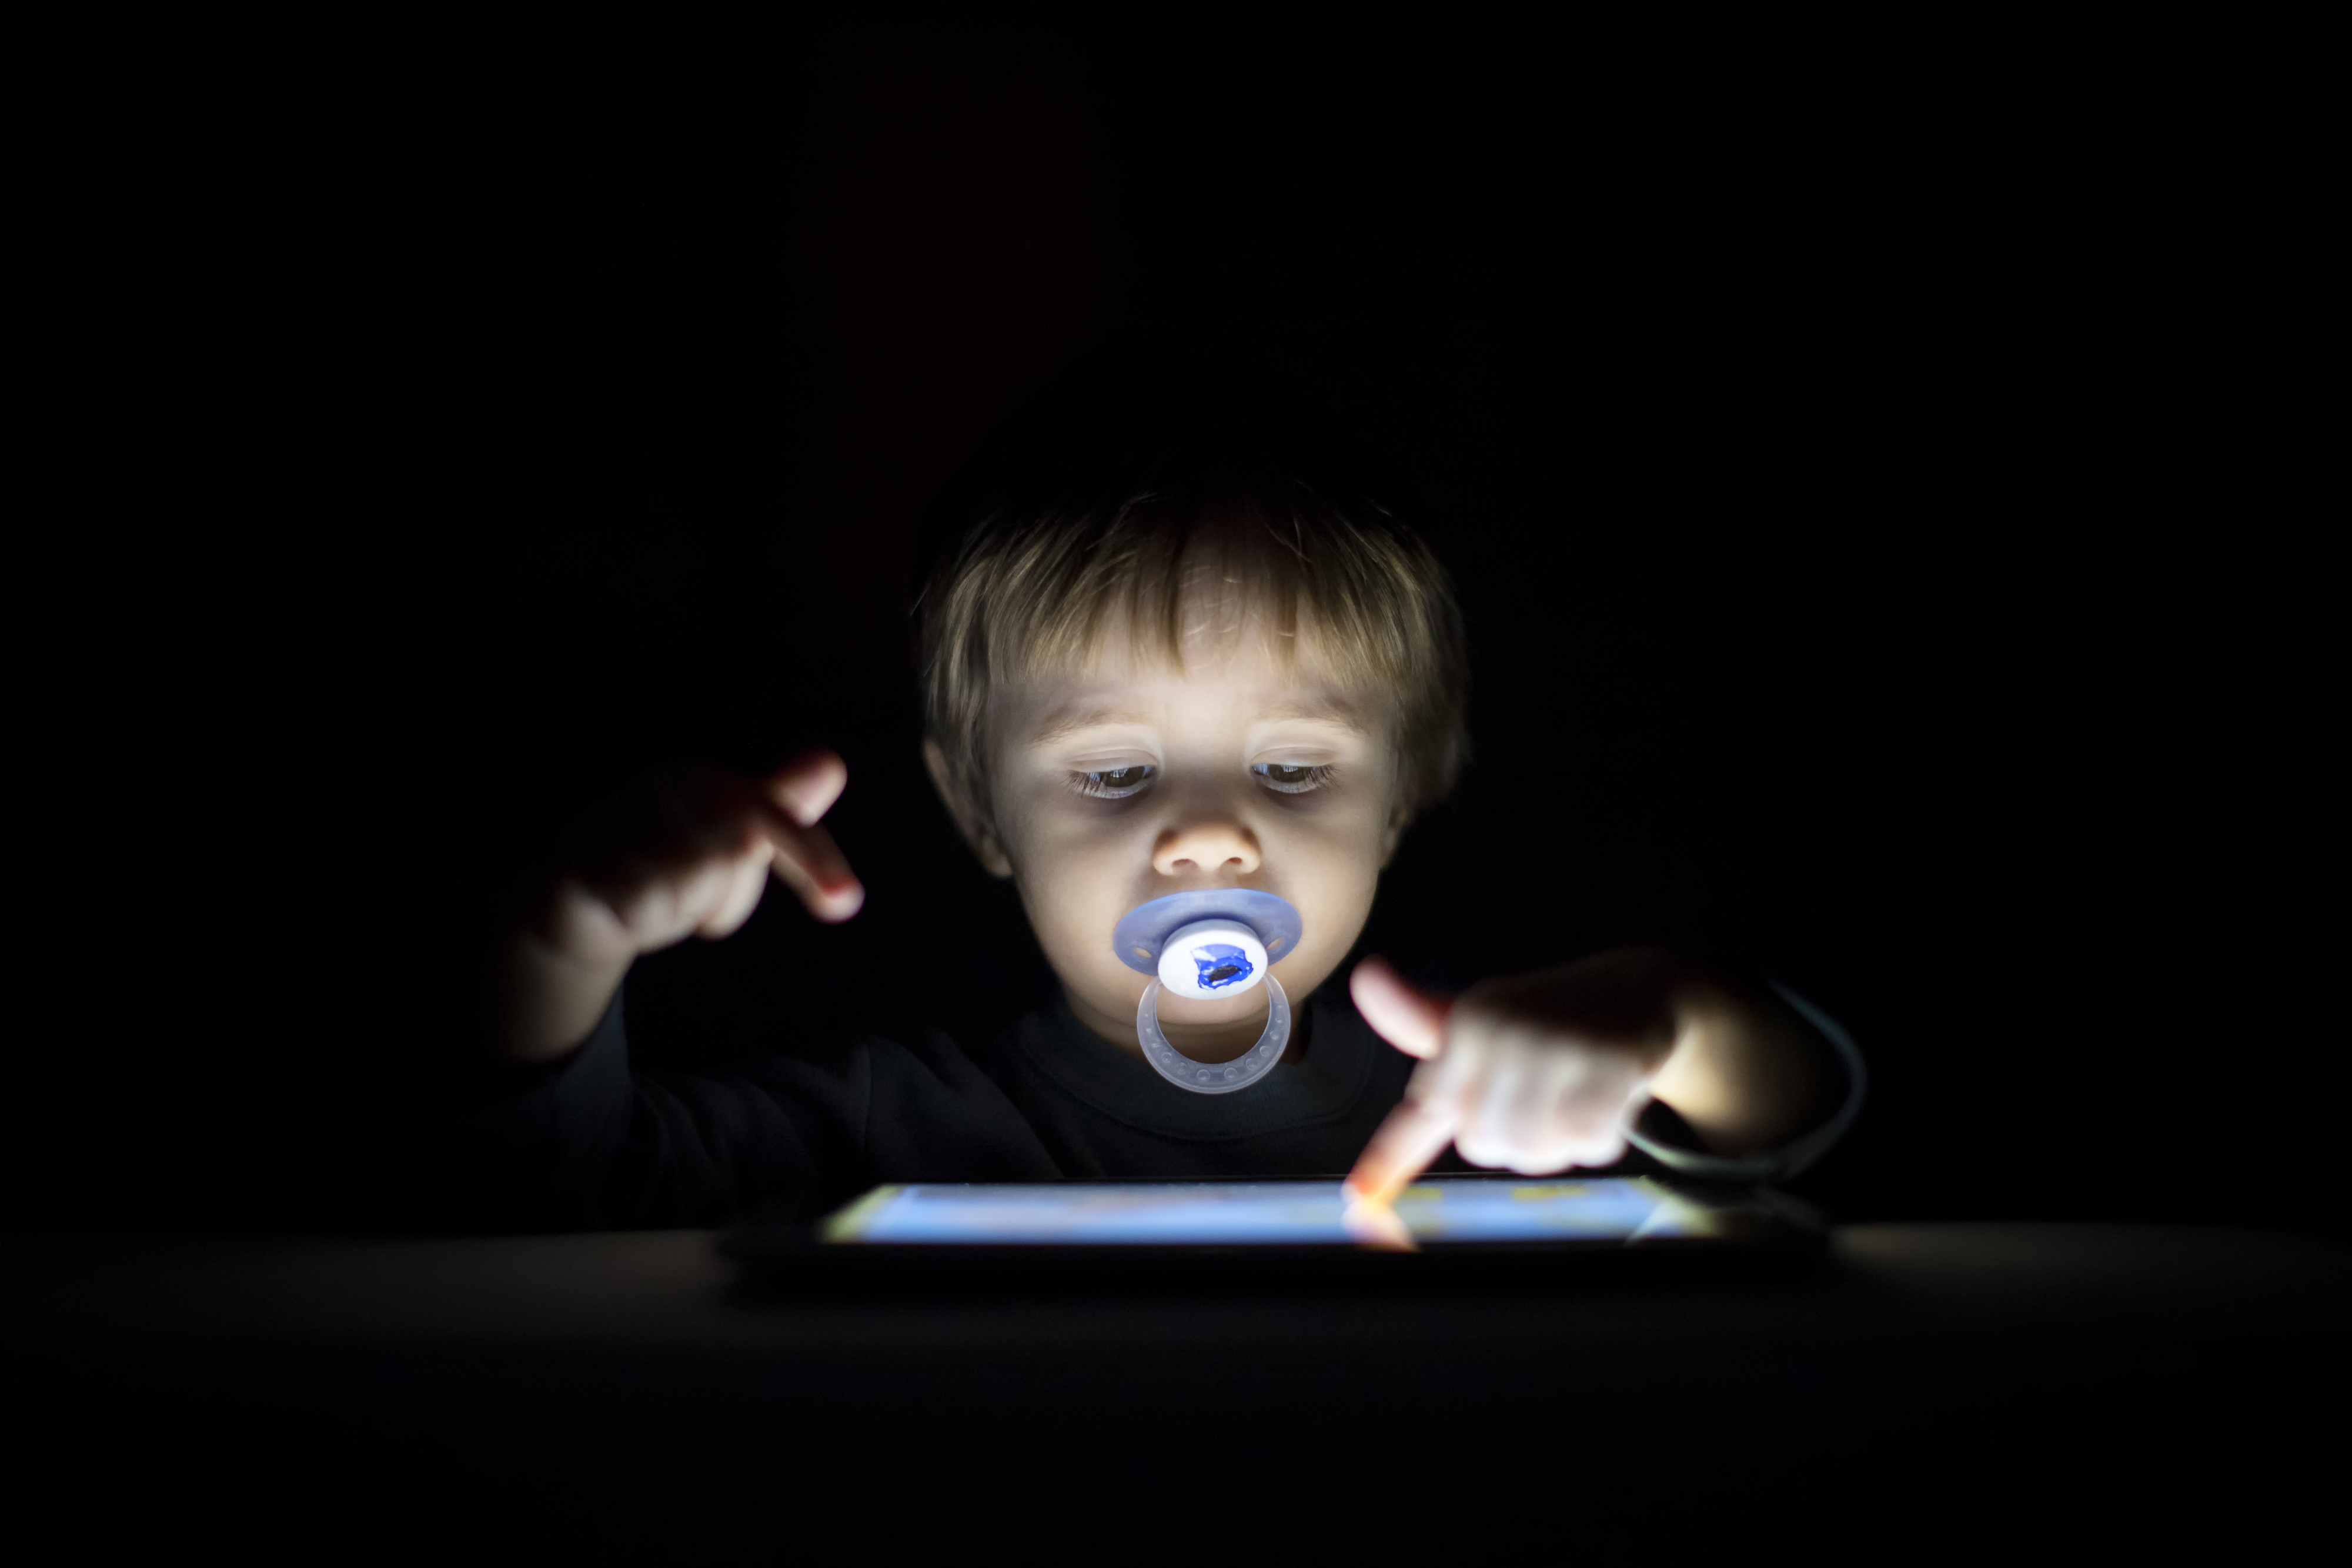 A toddler with a pacifier in their mouth using a tablet in a dark room with the tablet illuminating their face